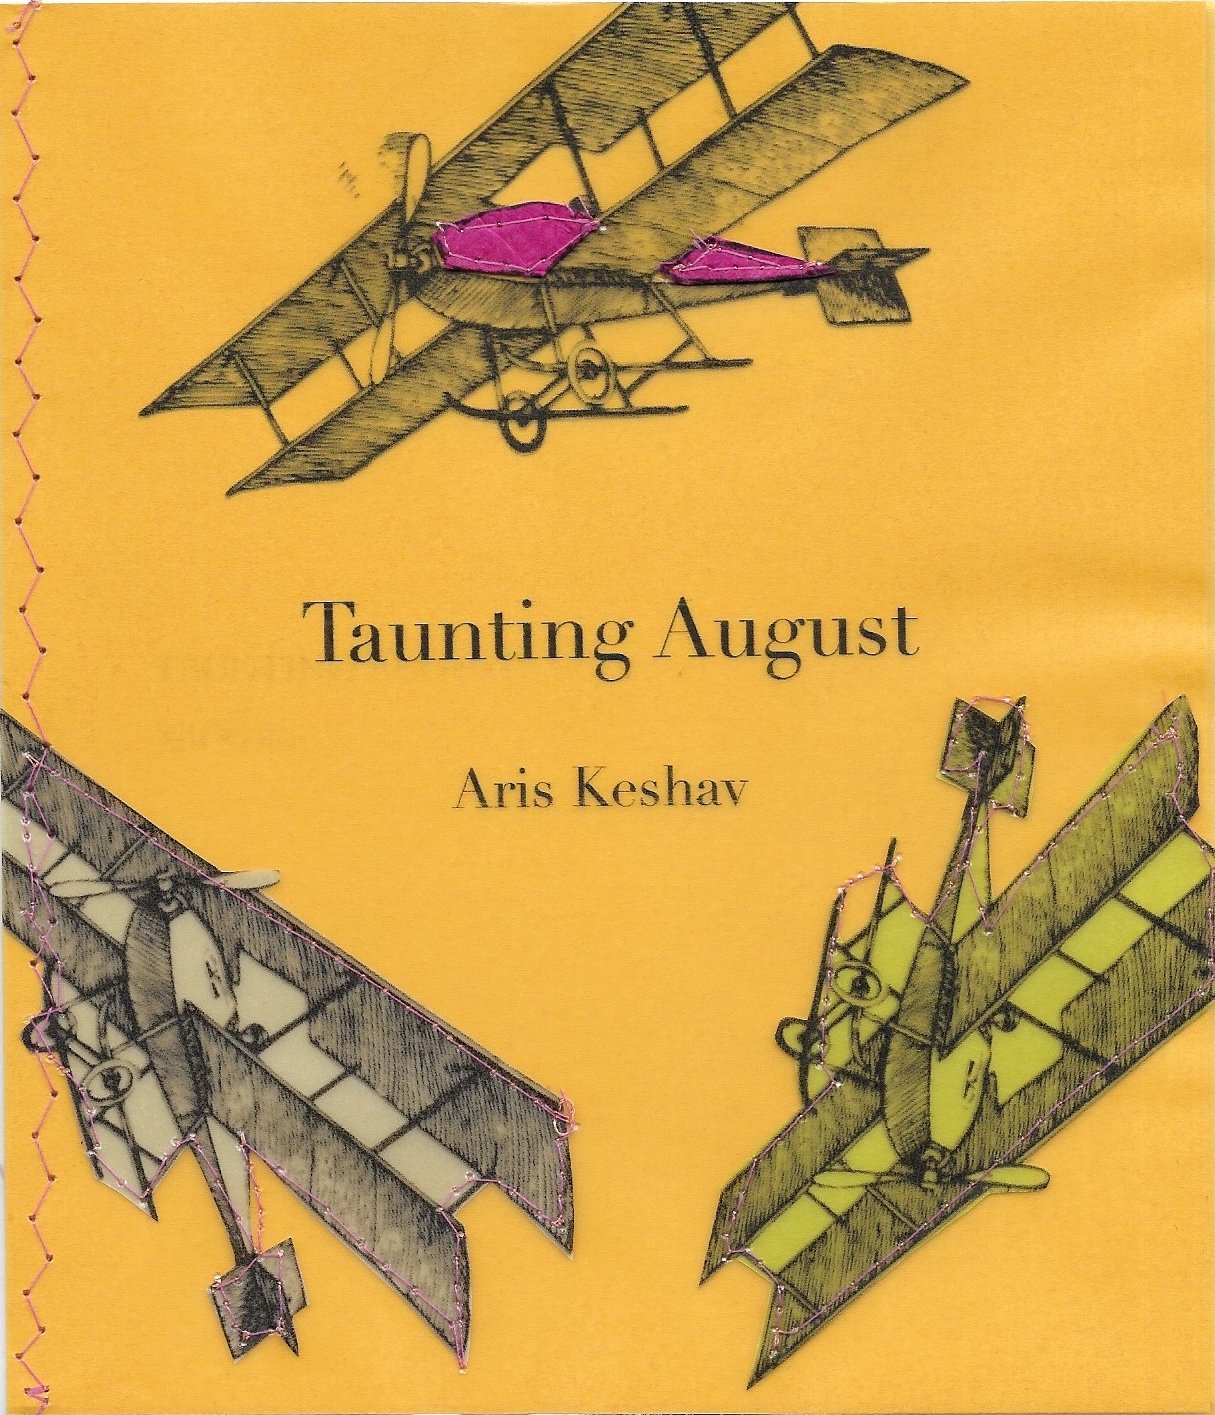 taunting august cover.jpg